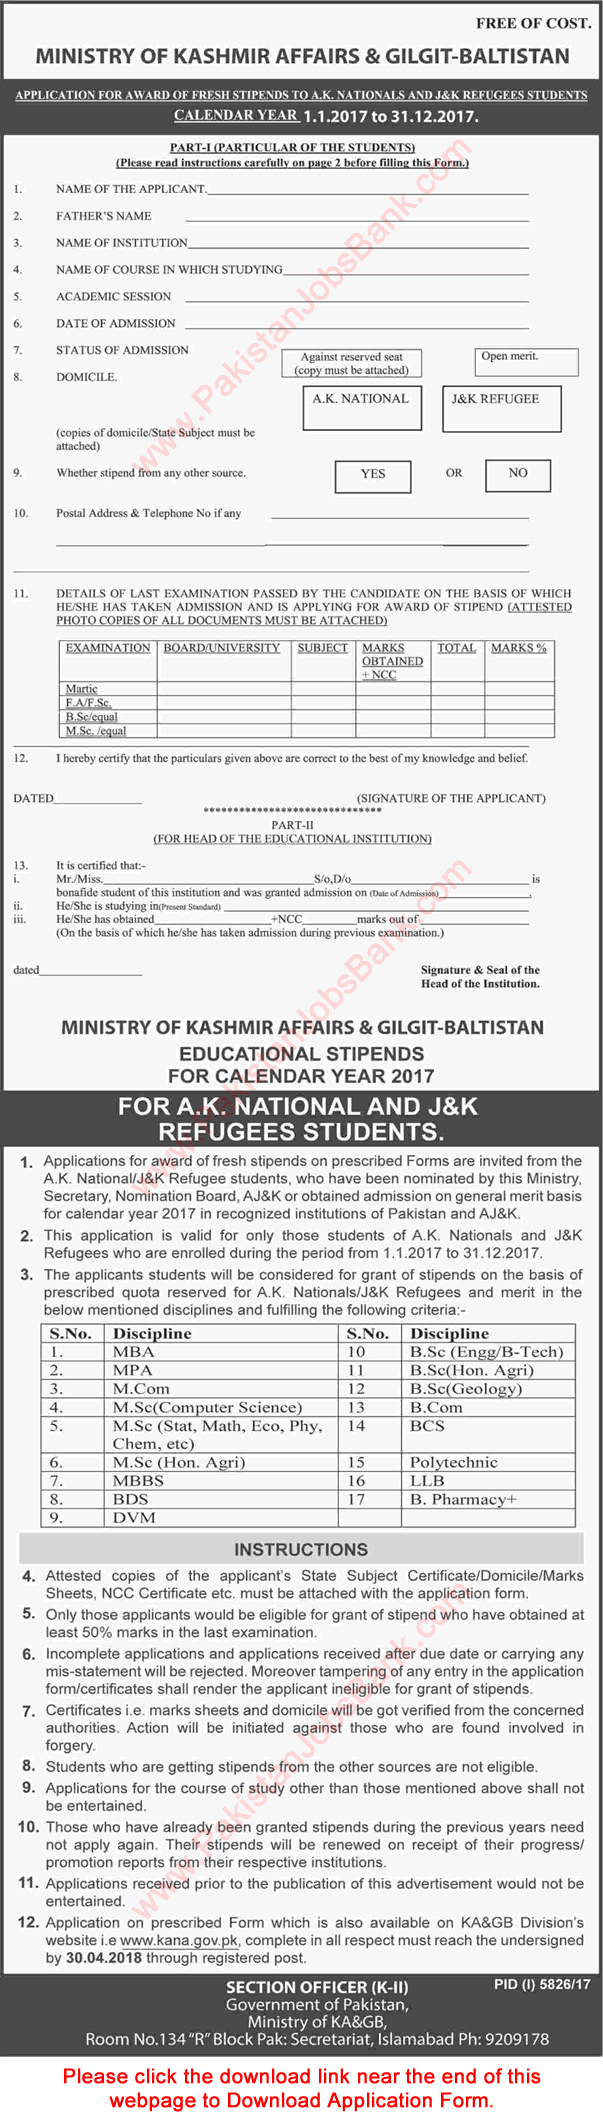 Ministry of Kashmir Affairs & Gilgit Baltistan Educational Stipends for AK National & J&K Refugees Students 2018 Latest